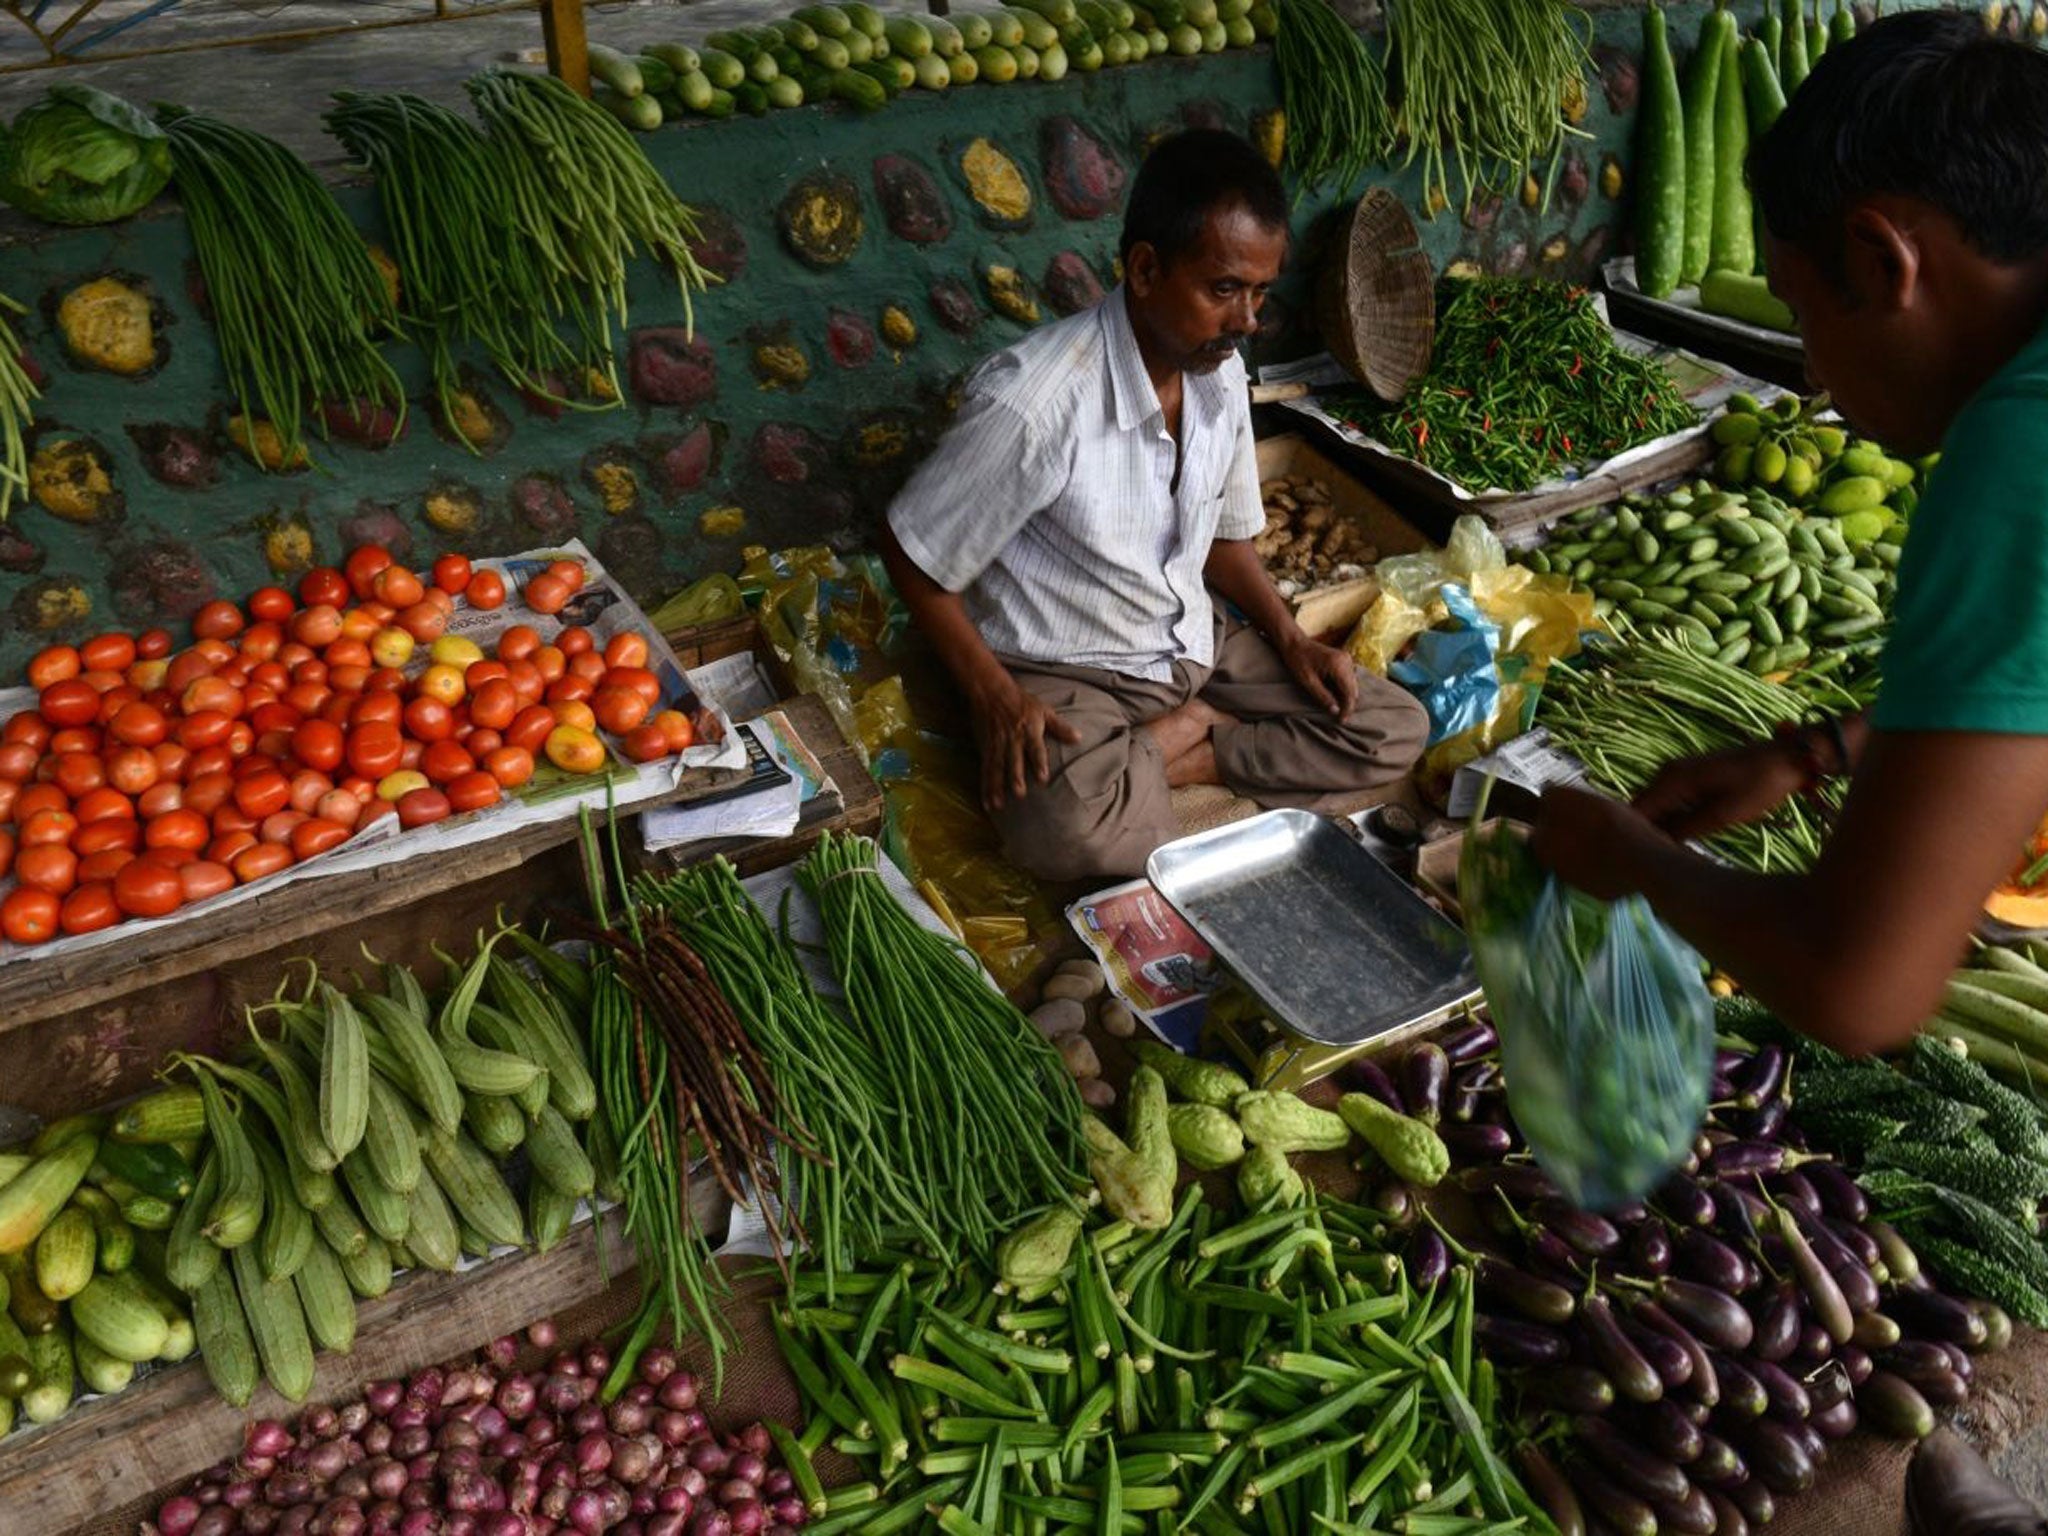 Green heaven: Most of Asia is a paradise for vegetarians, but that’s not the case everywhere